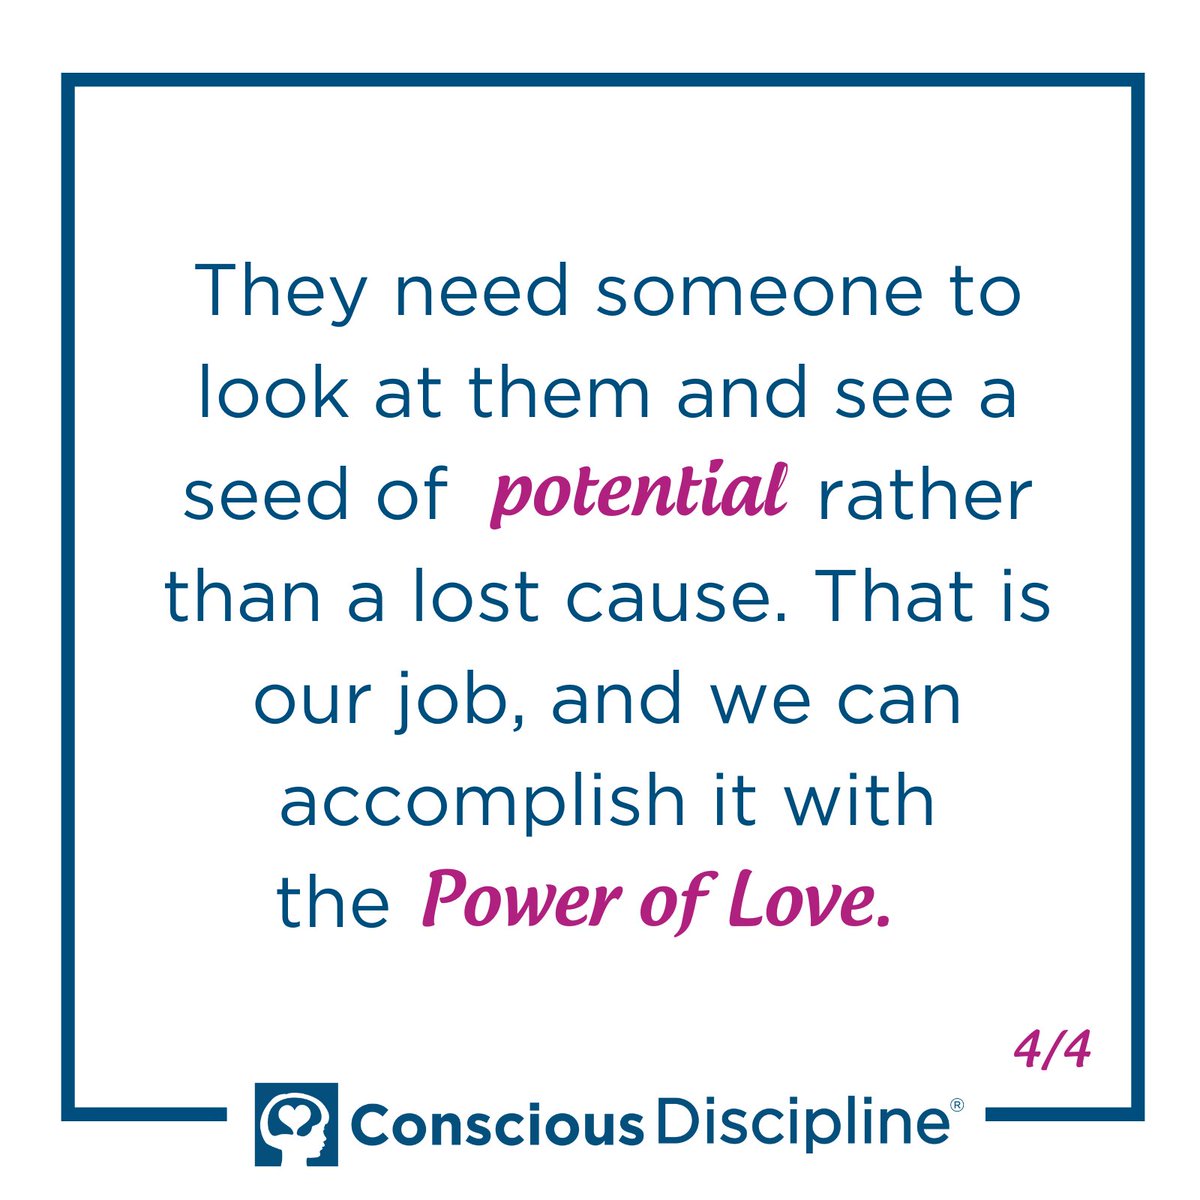 🩷 Continue learning more about the Power of Love here: consciousdiscipline.com/seven-powers-p…